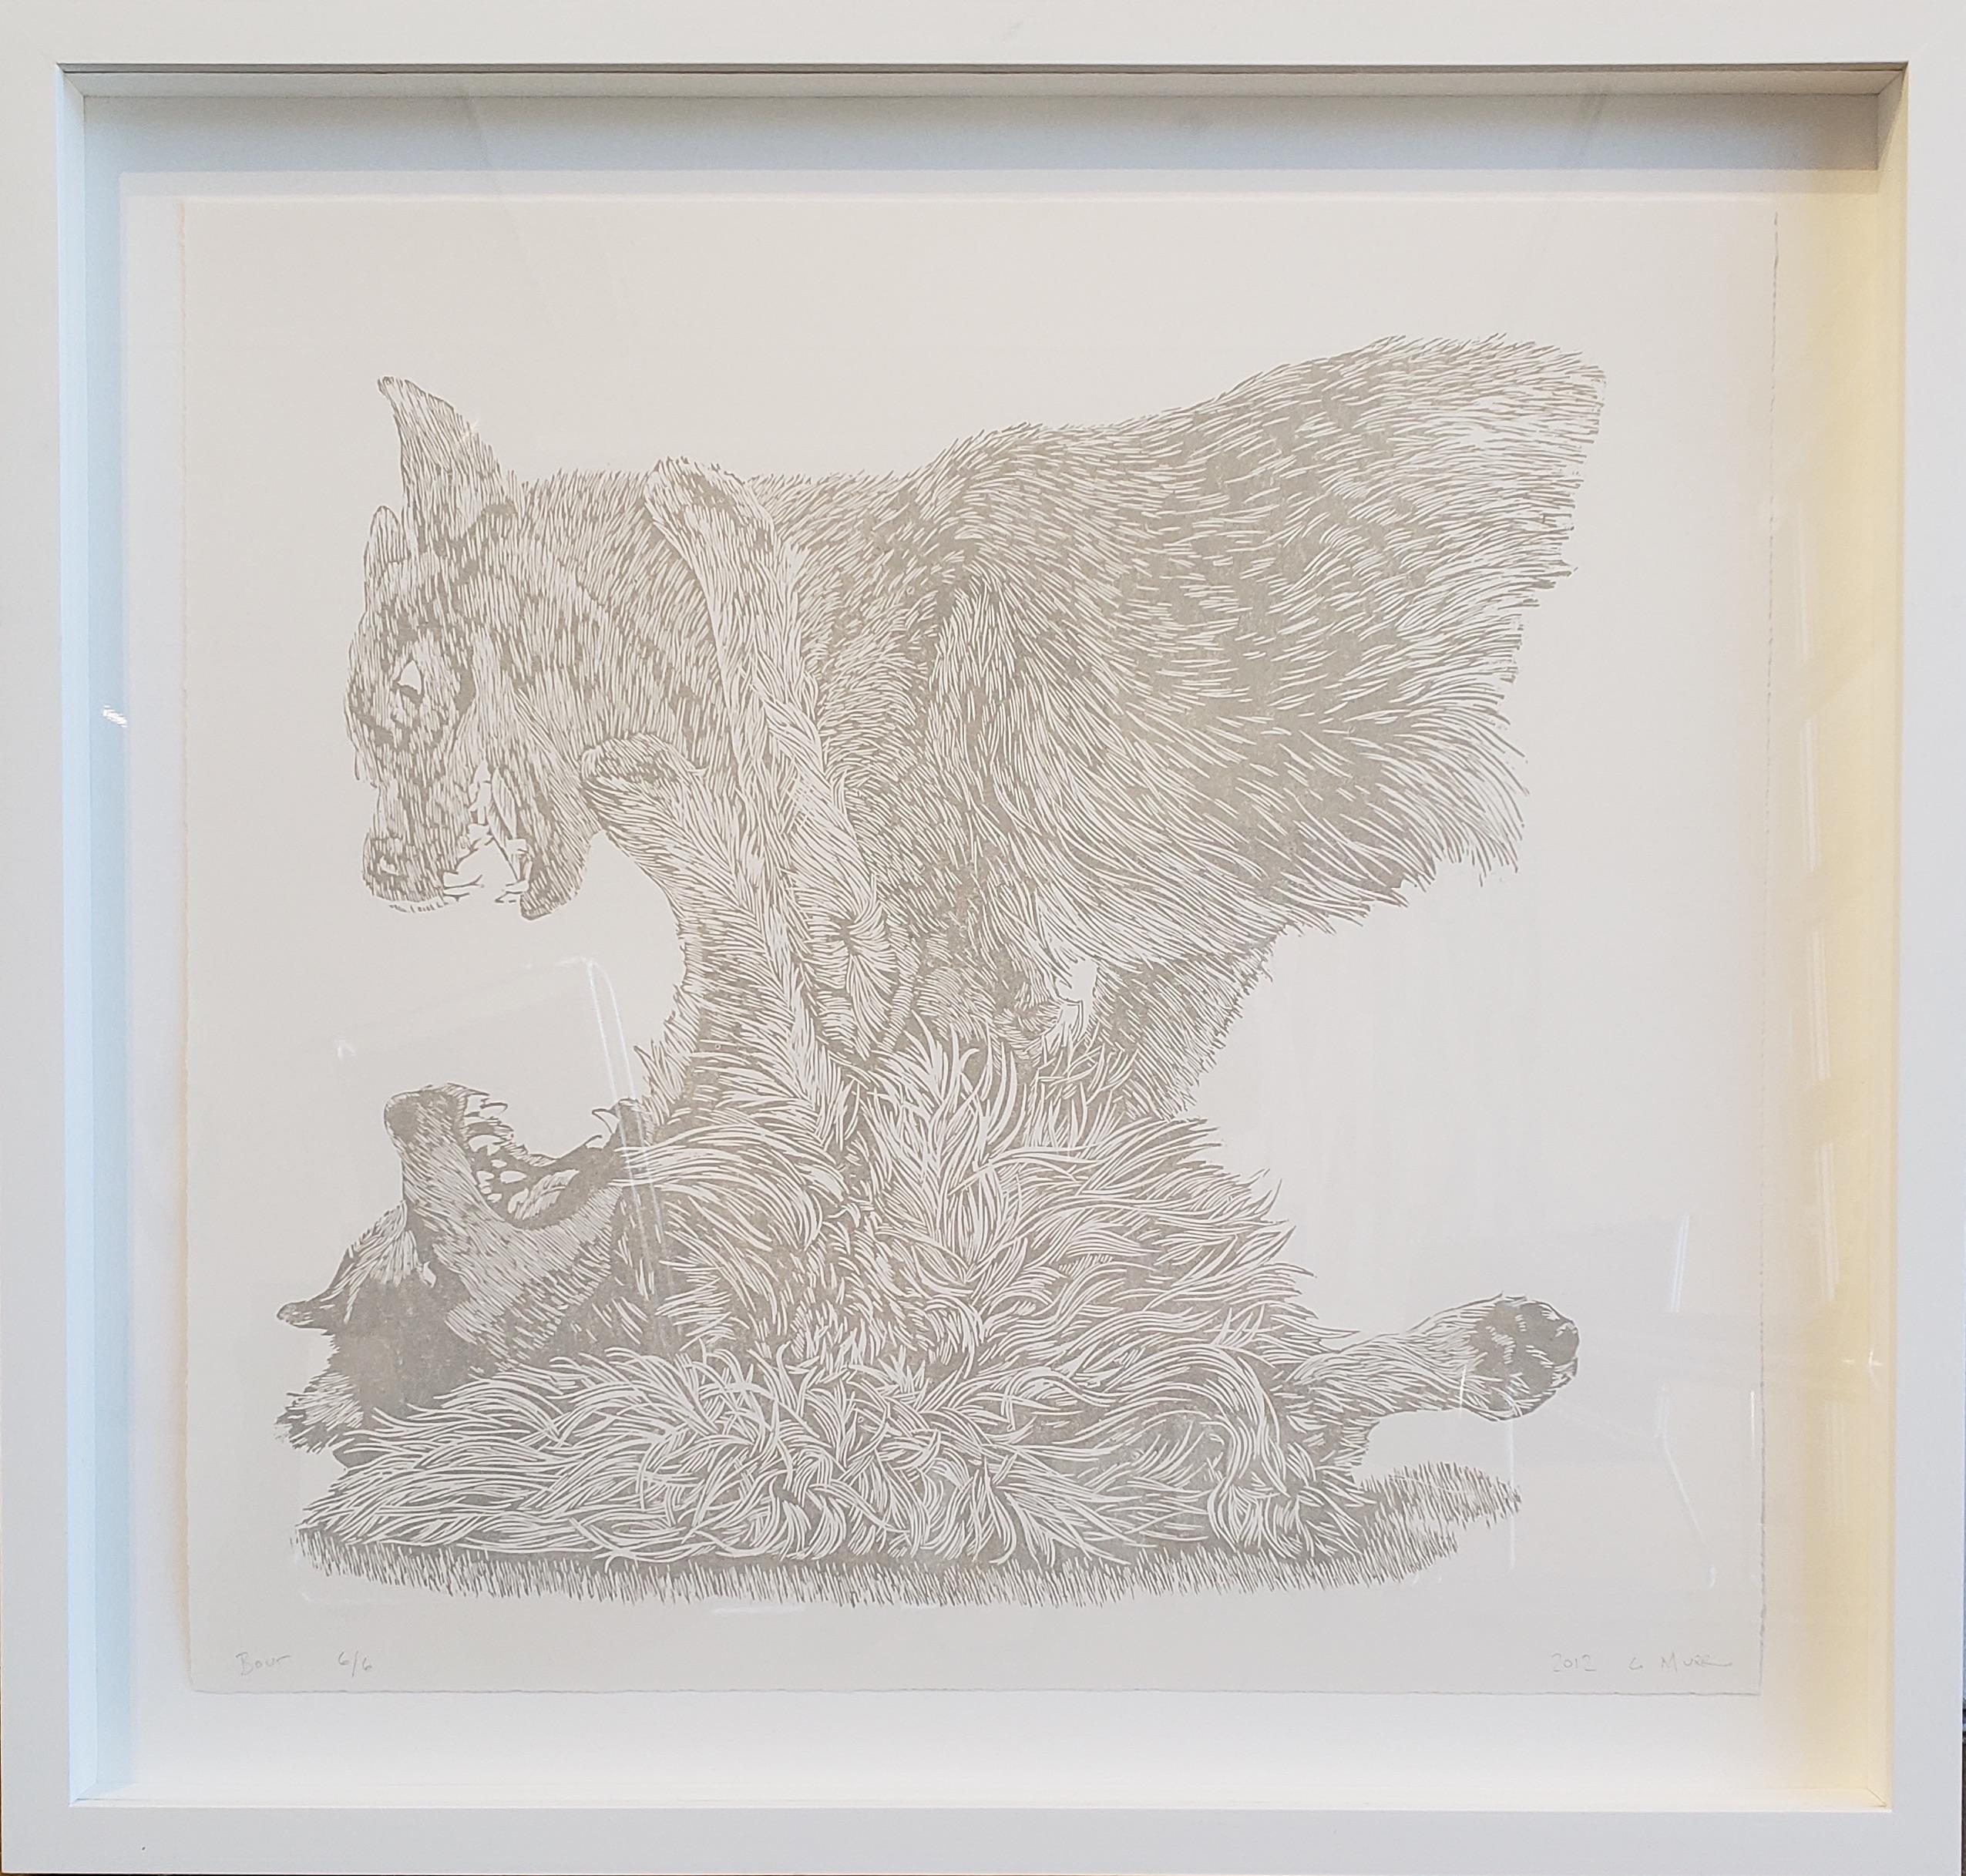 Greg Murr combines painting and drawing in airy compositions that function as philosophical inquiries into the flux of the natural world. In his aptly titled, limited edition woodcut print "Bout," Murr depicts two wolves engaged in a wrestling match